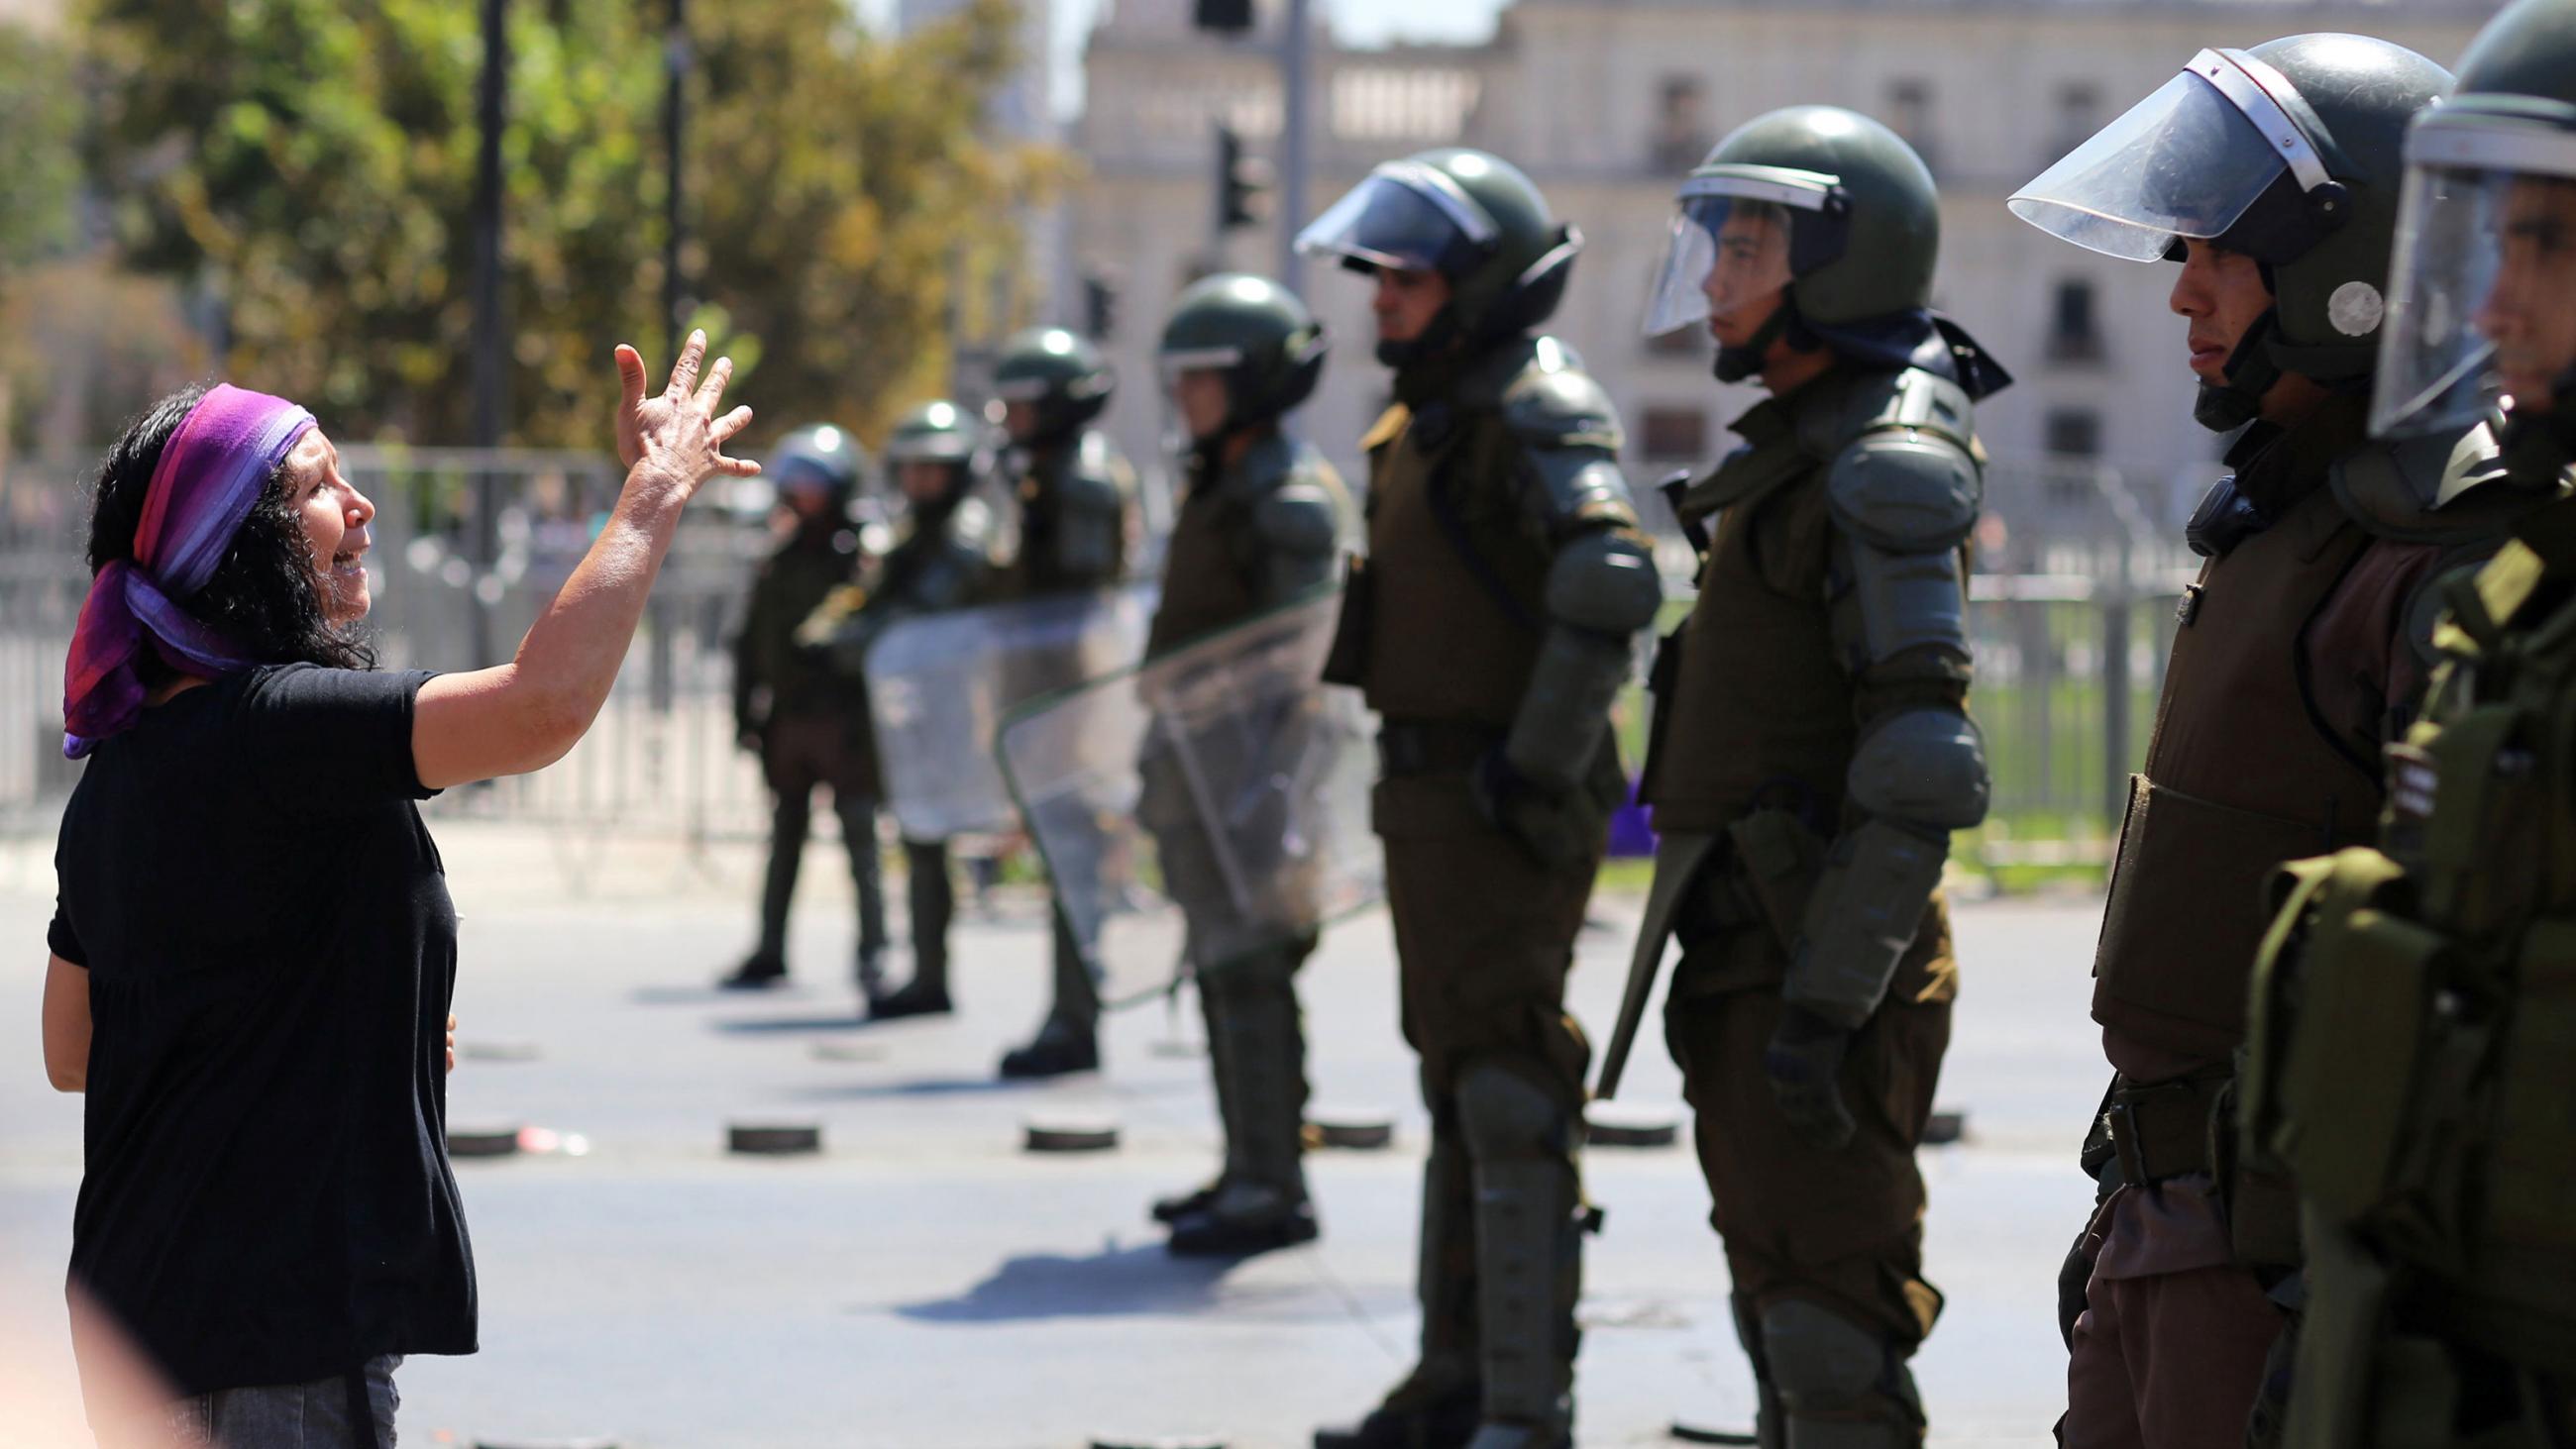 This is a striking photo where a woman wearing a colorful bandana is shouting at a line of police wearing riot gear and gesturing with her hand. 